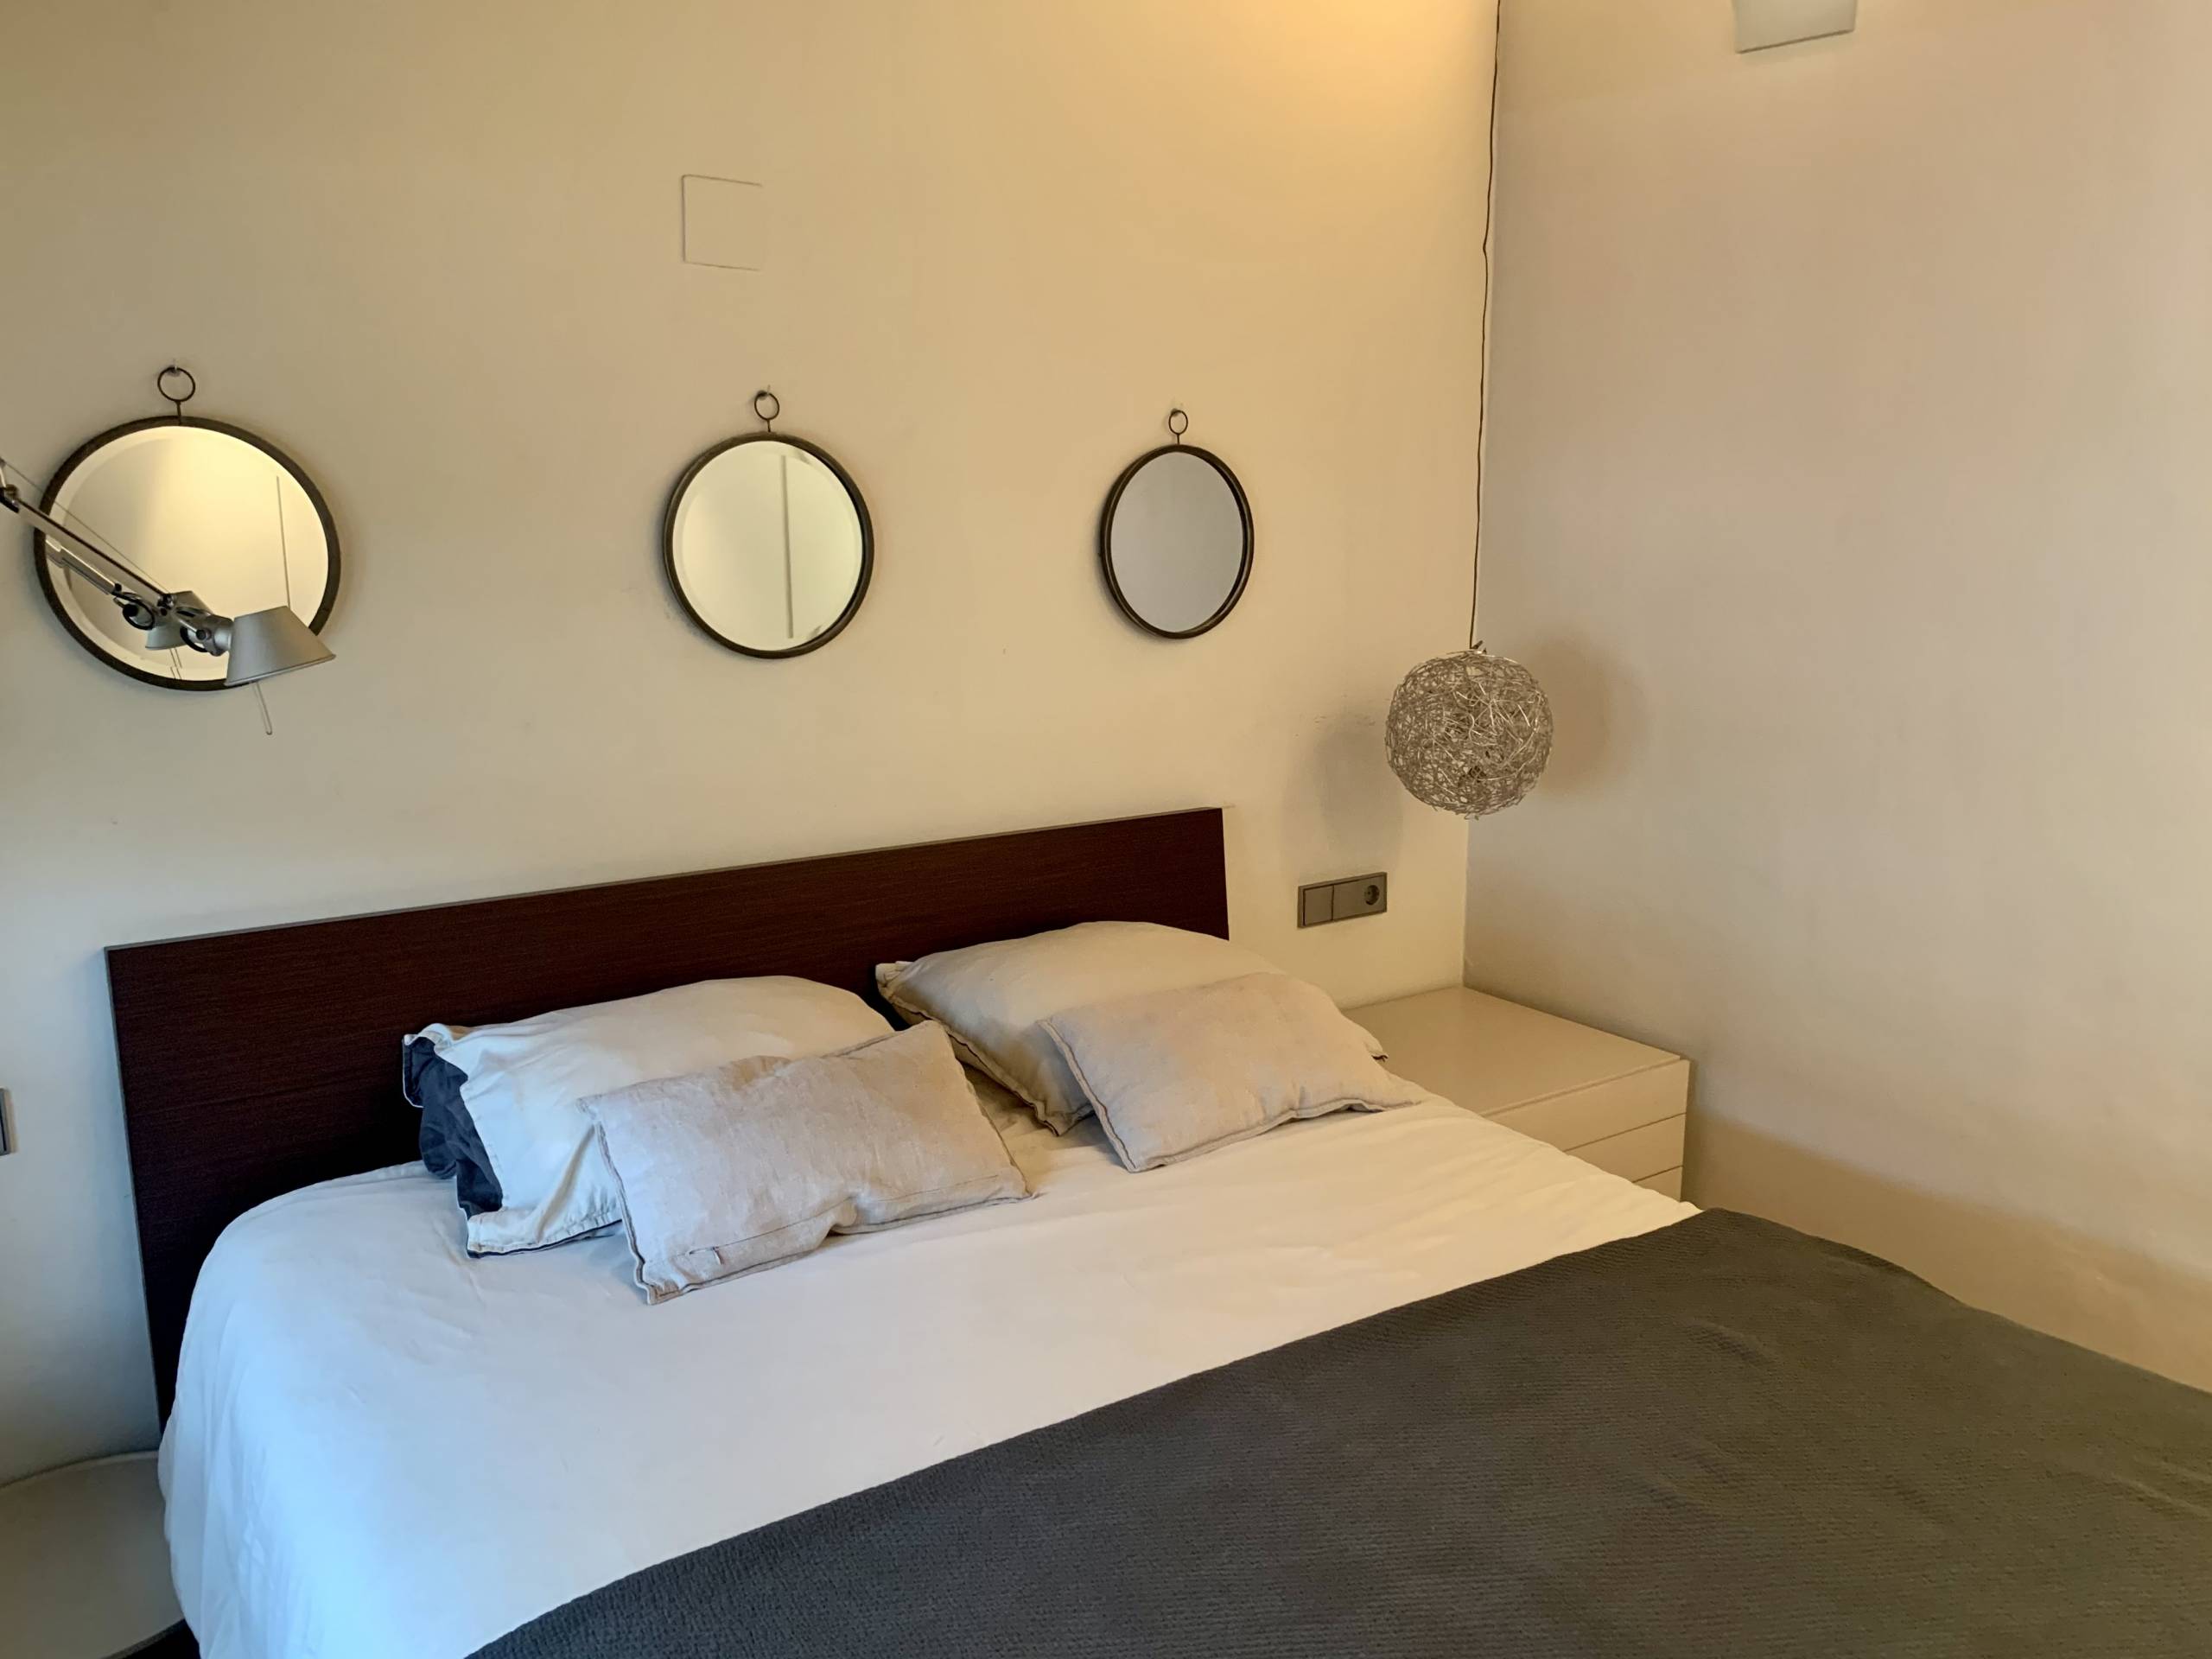 Caballeros - 2 bedroom apartment in Valencia for expats